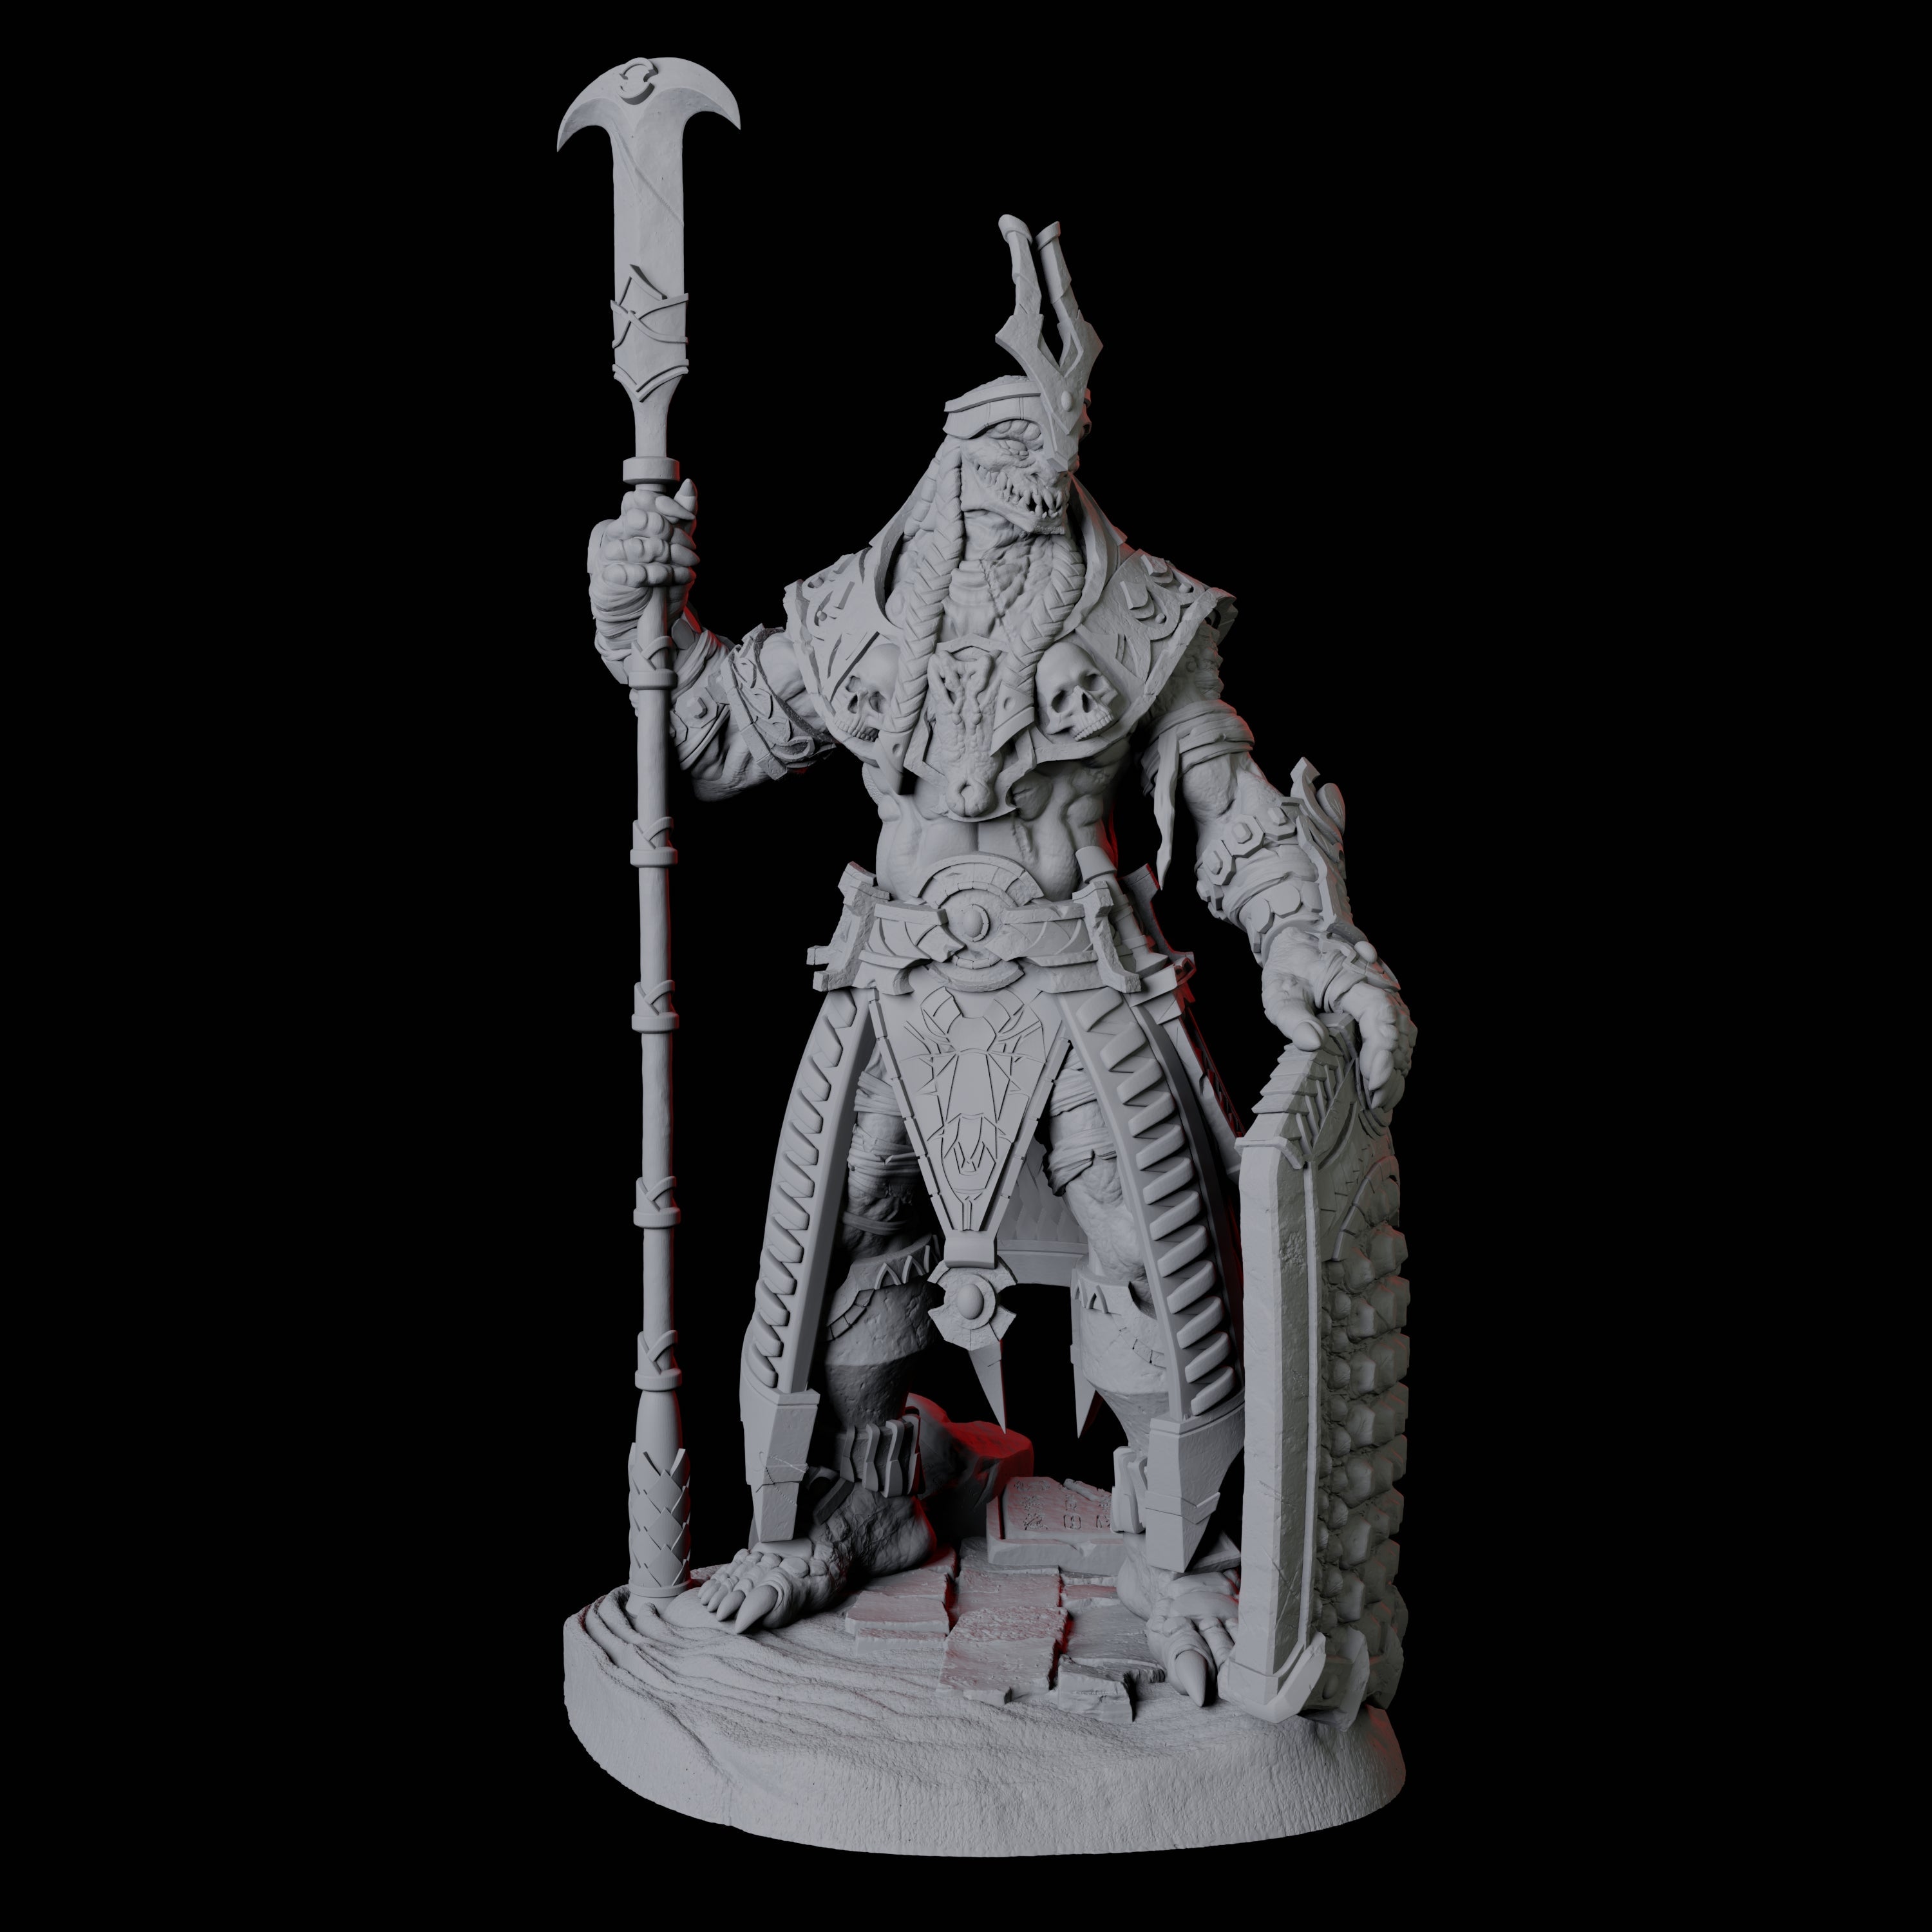 Saurian War Priest D Miniature for Dungeons and Dragons, Pathfinder or other TTRPGs